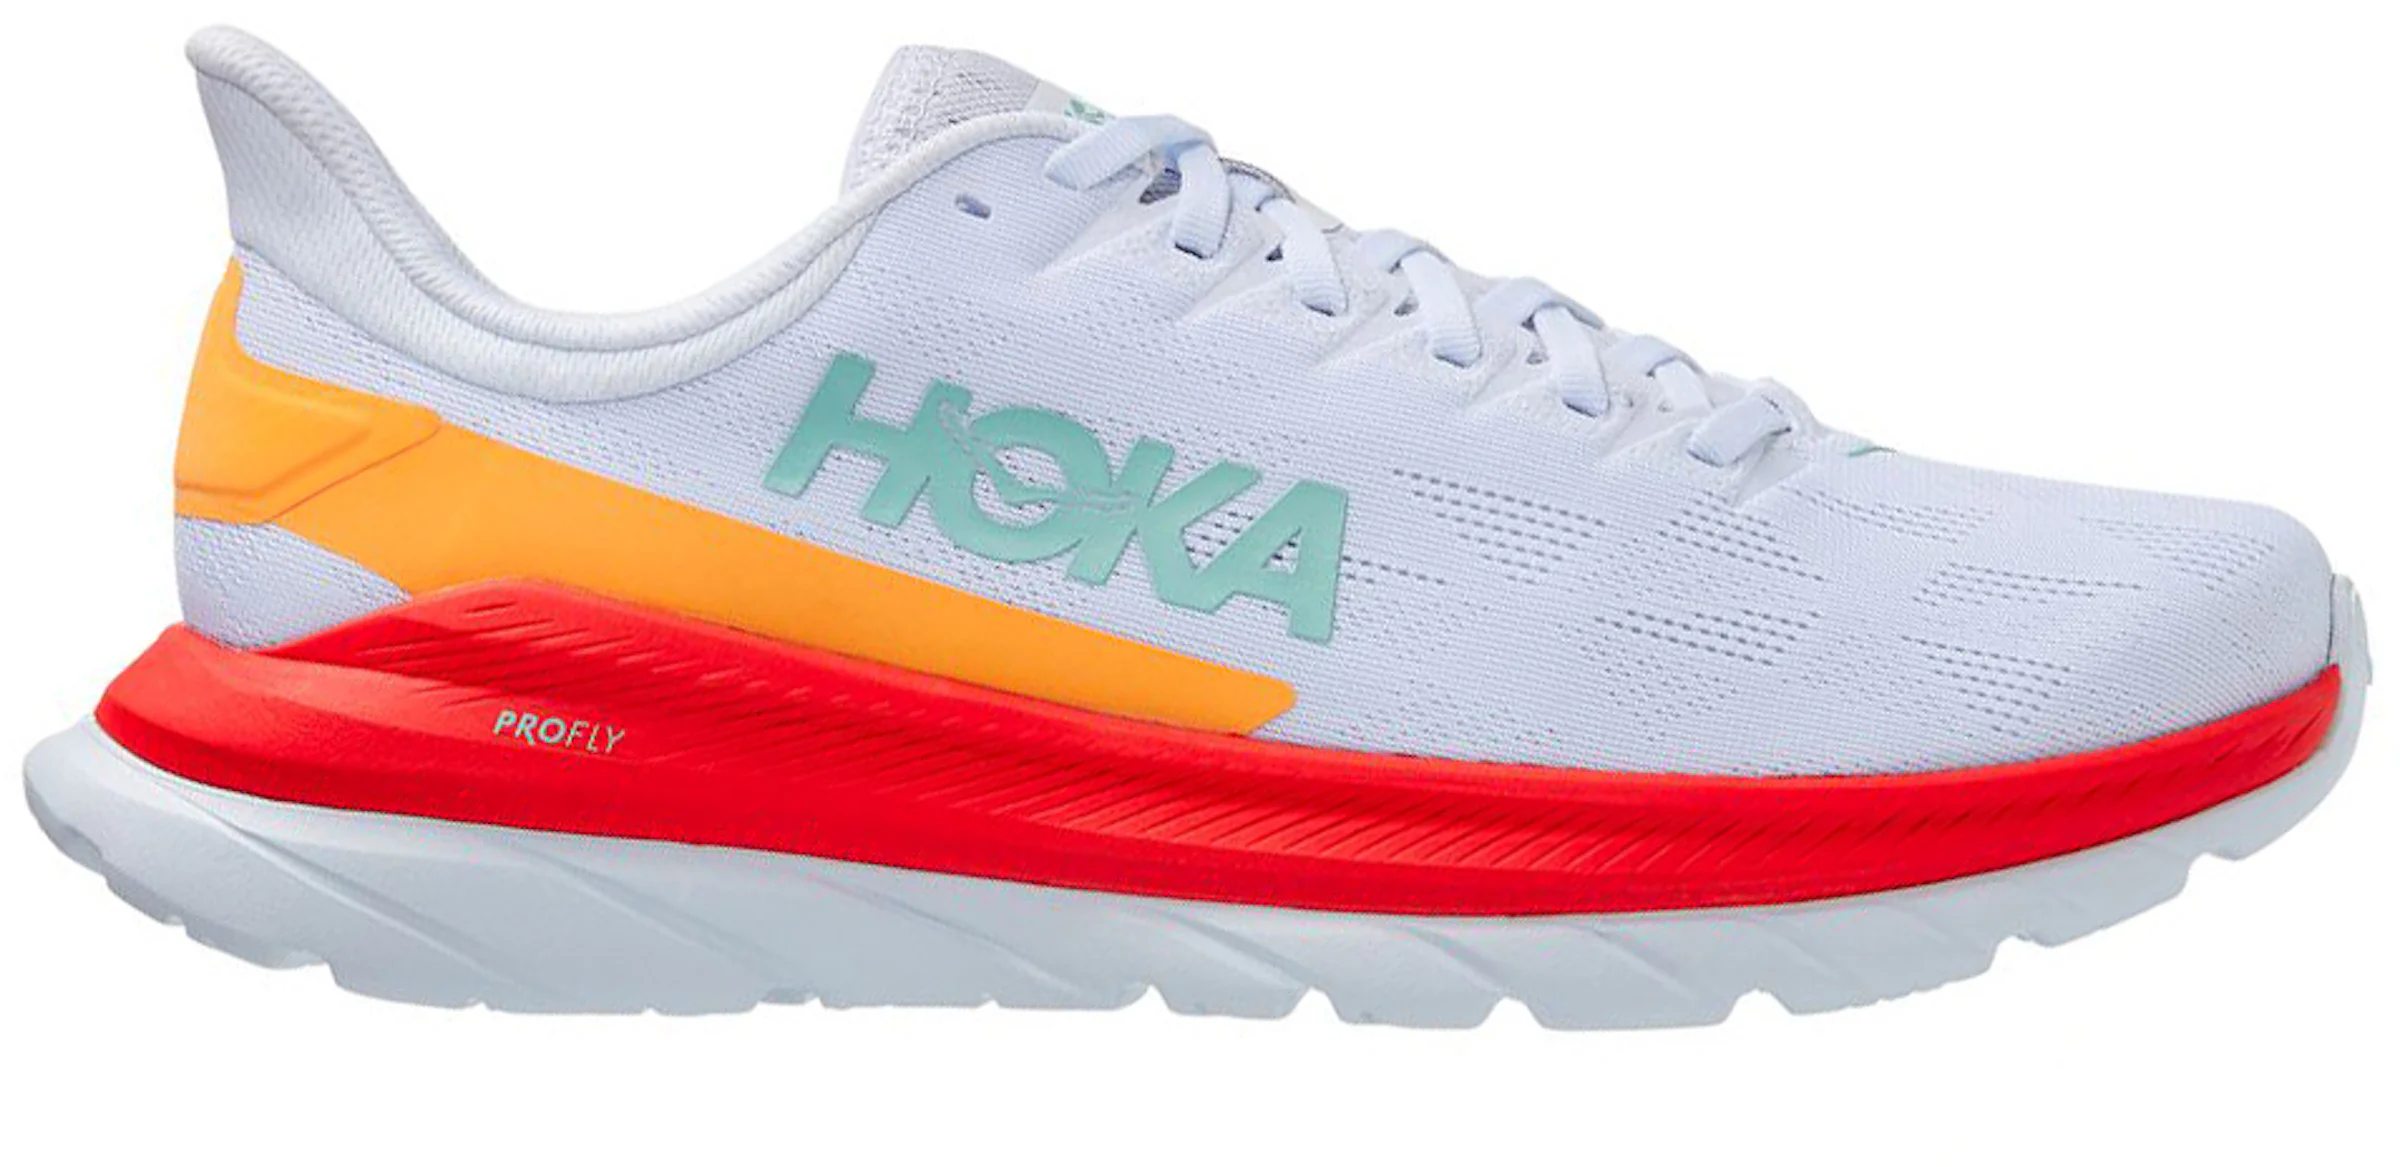 Hoka One One M Mach 4 White Red Orange Running Shoes Sneakers Men's Size 12  D